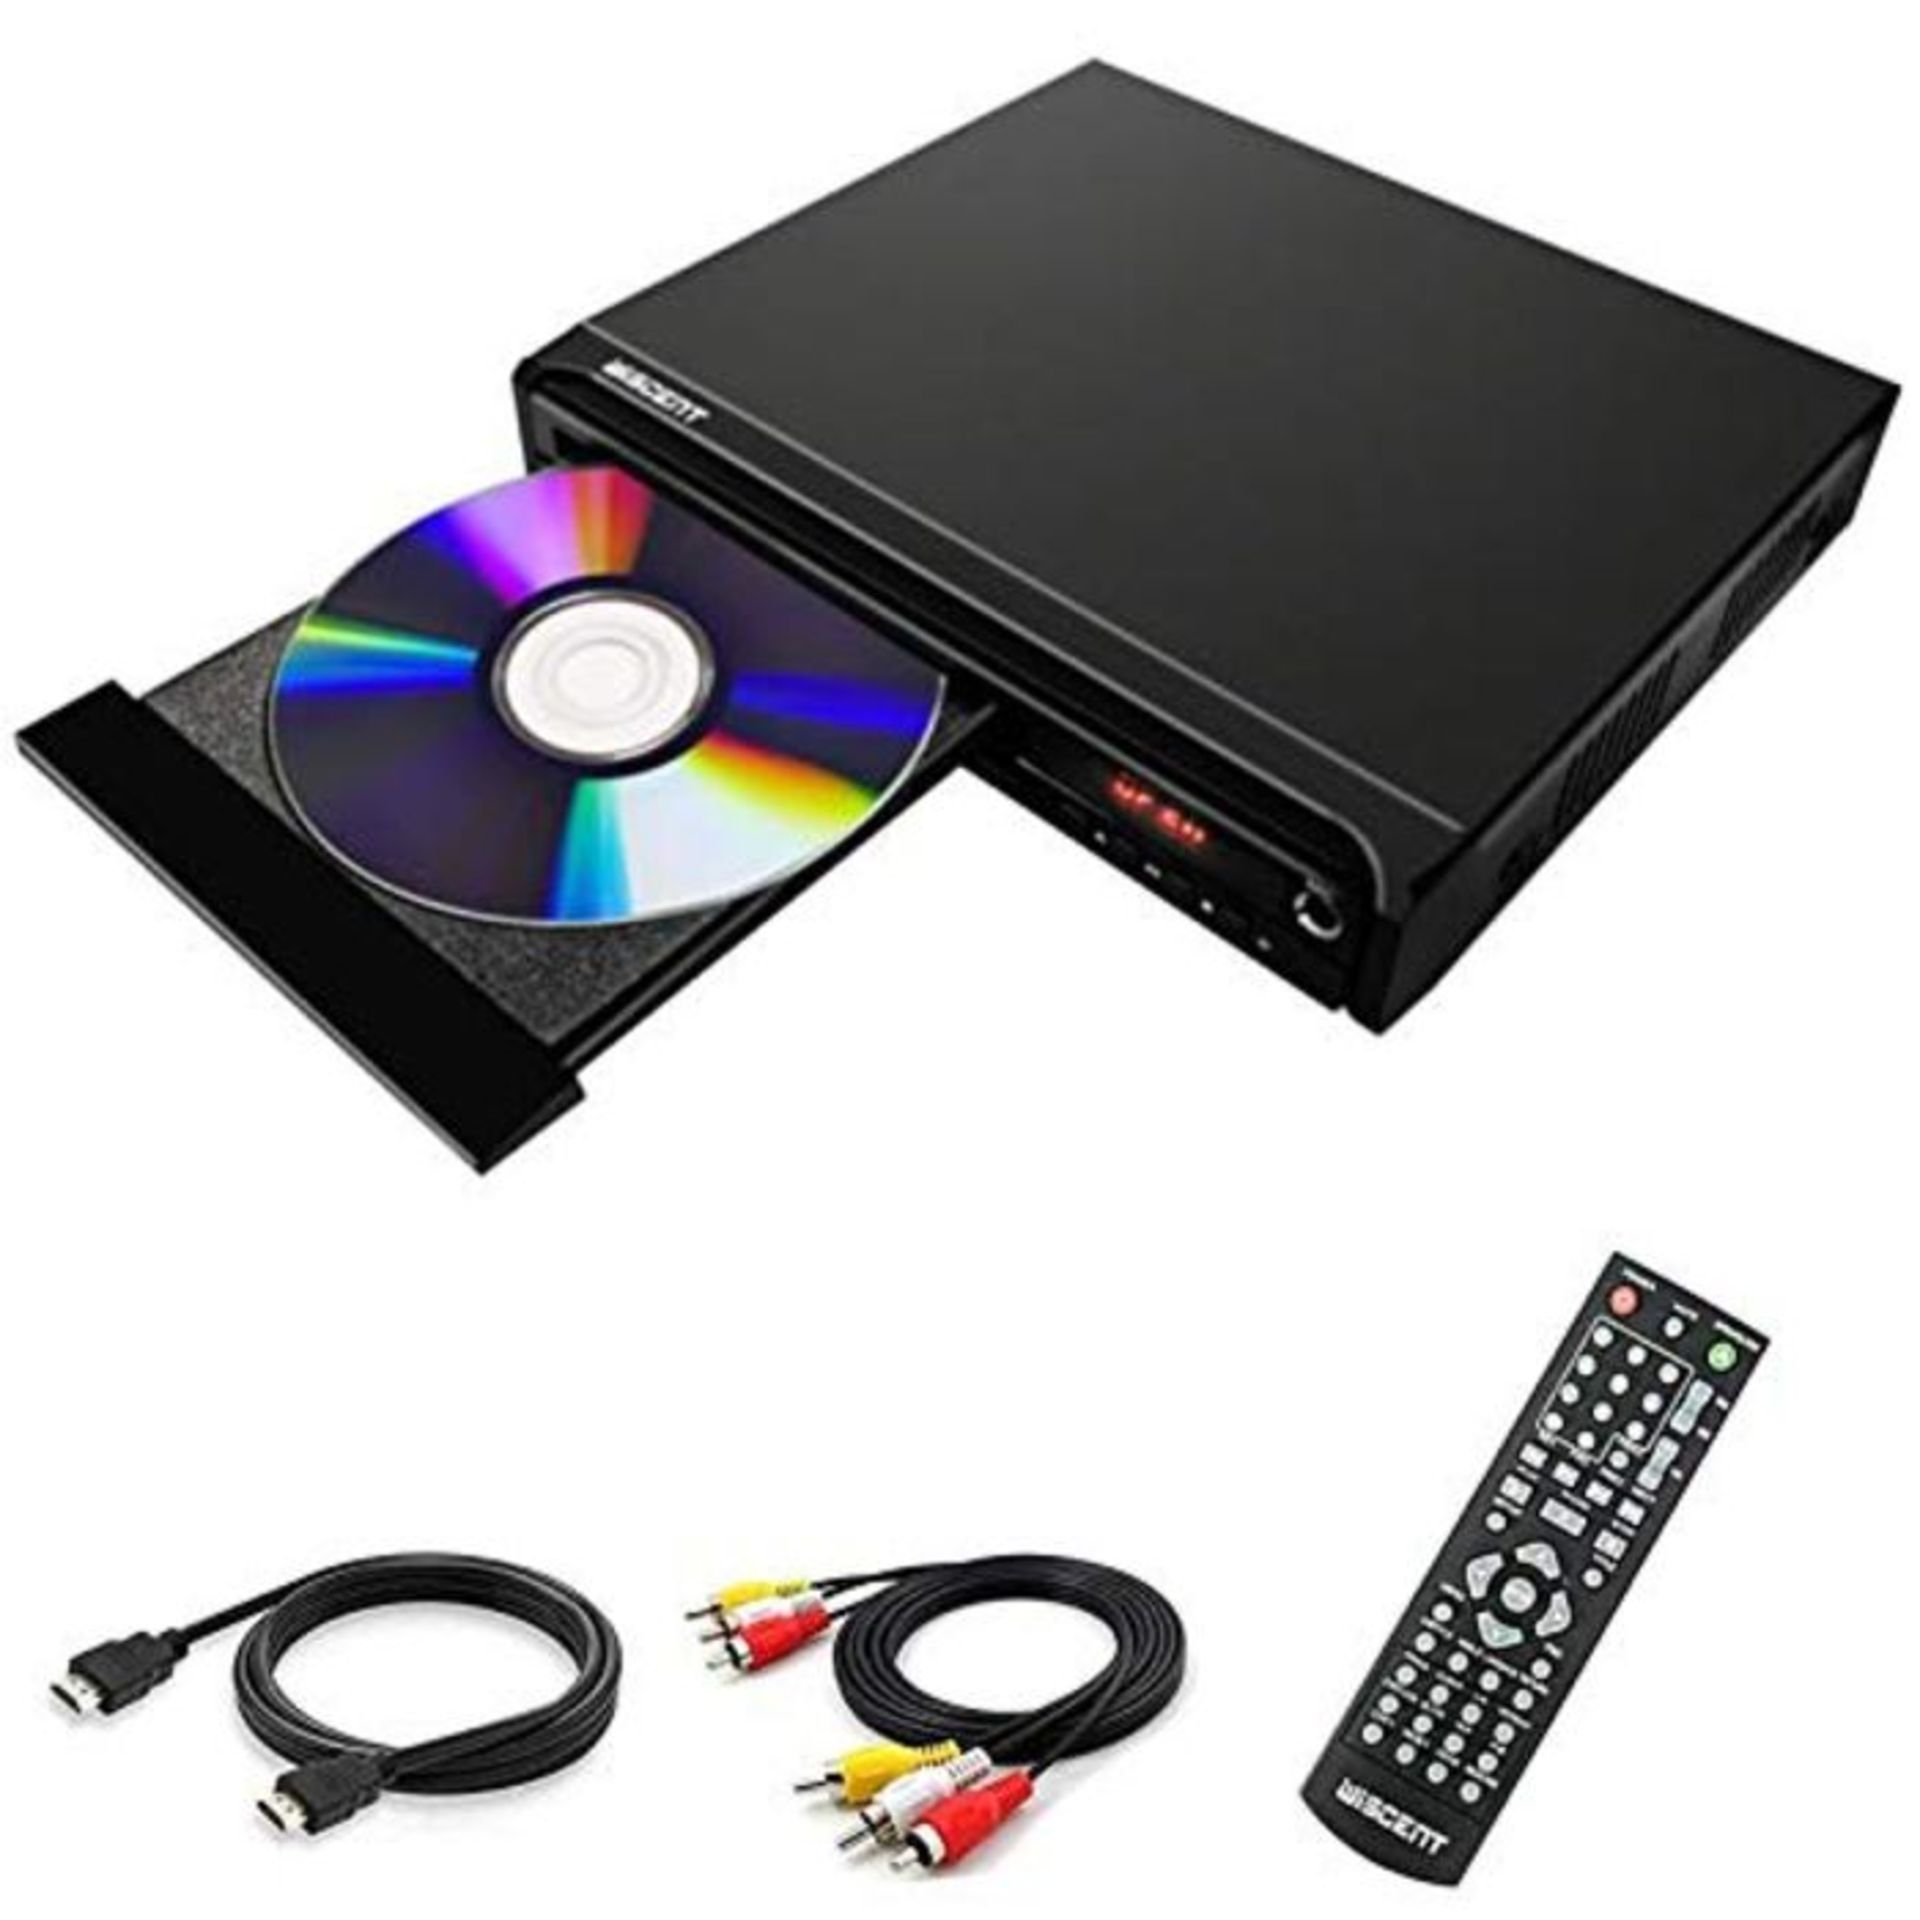 DVD Player for TV,All-Region Free,Mini Compact DVD CD MP3 Player,with HDMI Cable for T